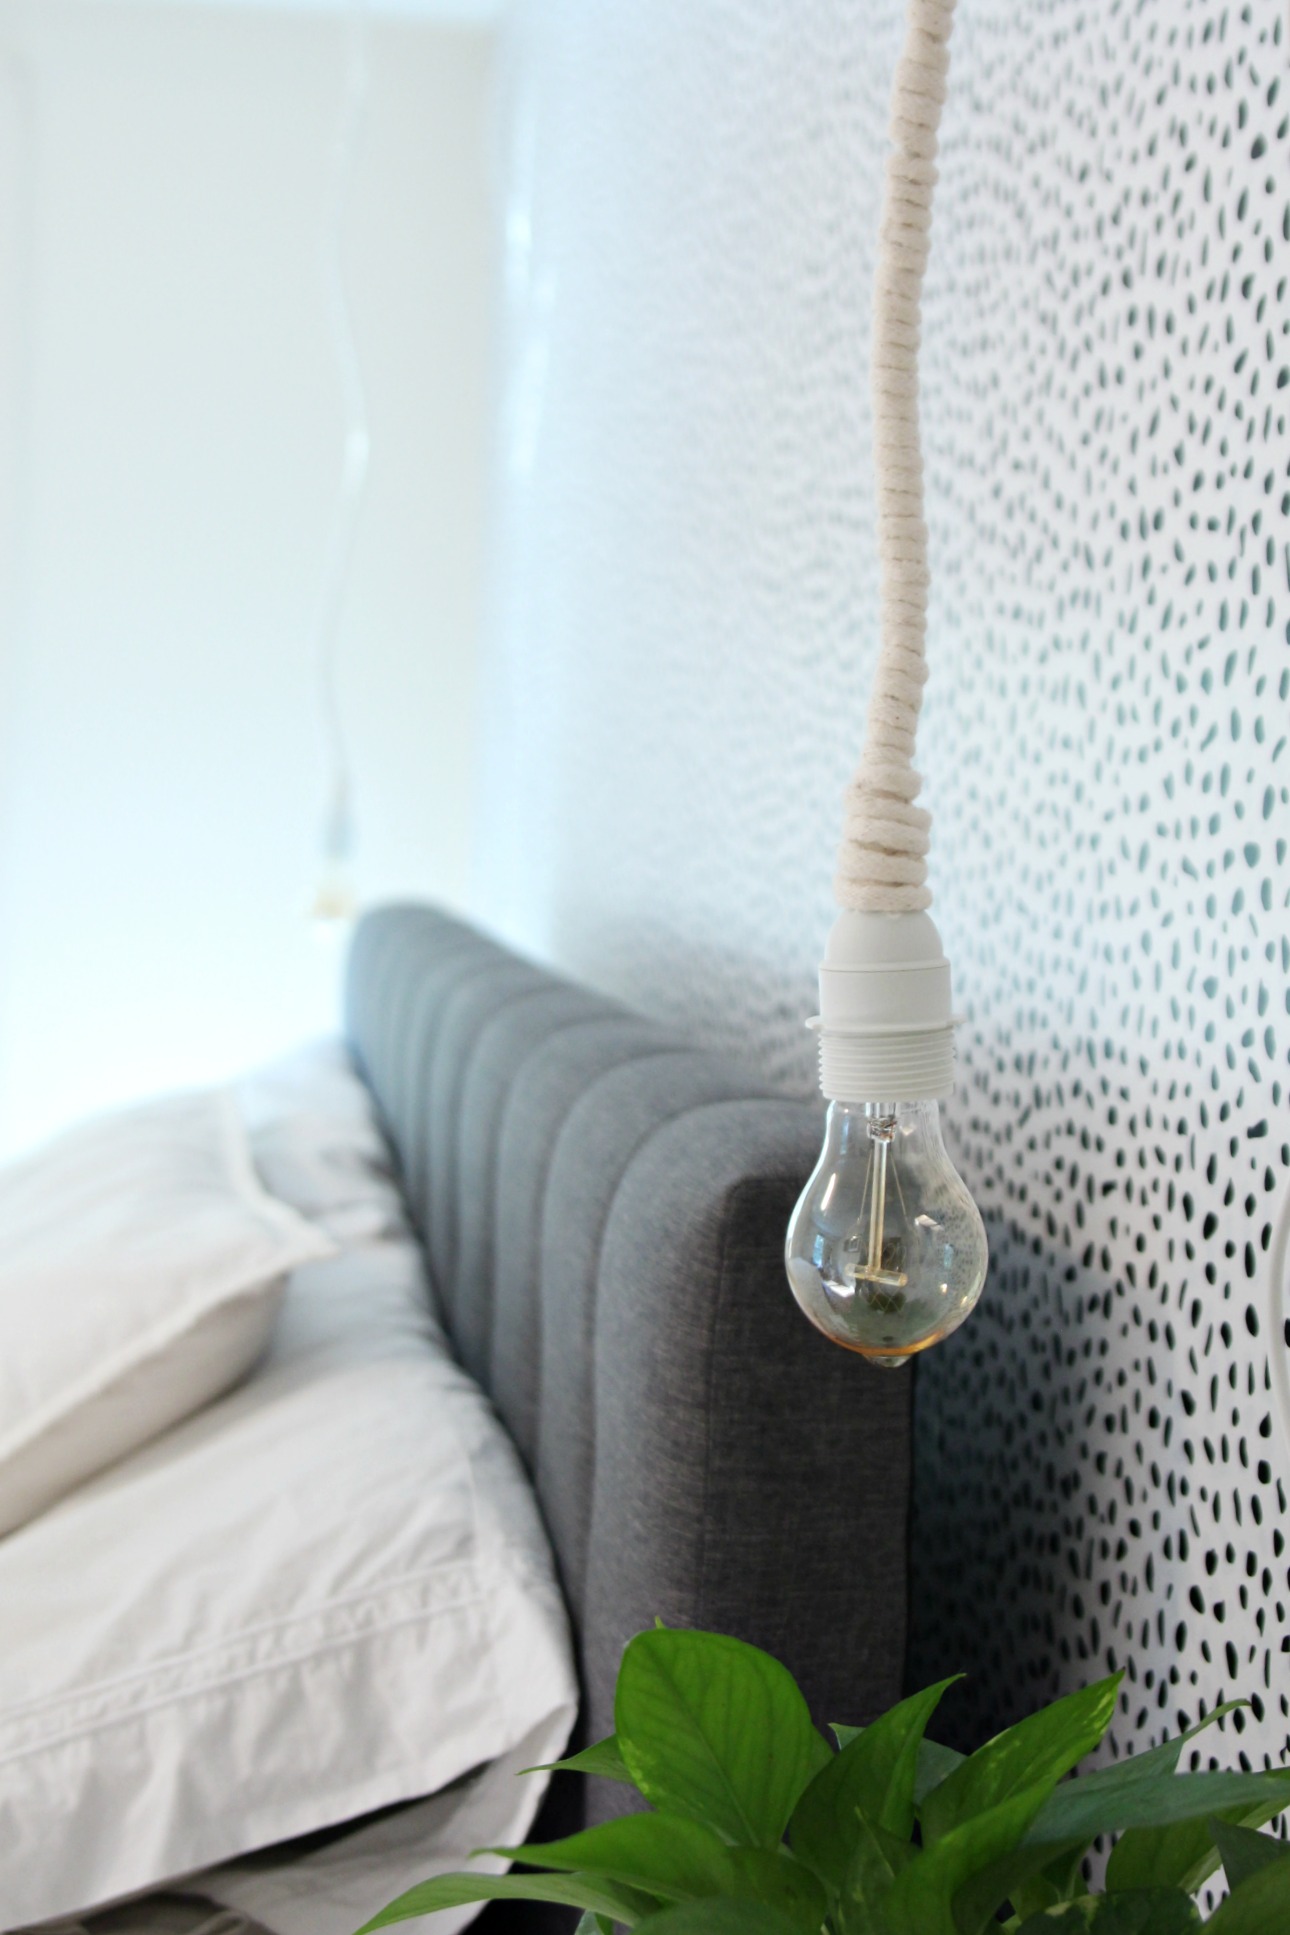 How to Make the DIY Hanging Rope Lights/ Loop Line Lamps